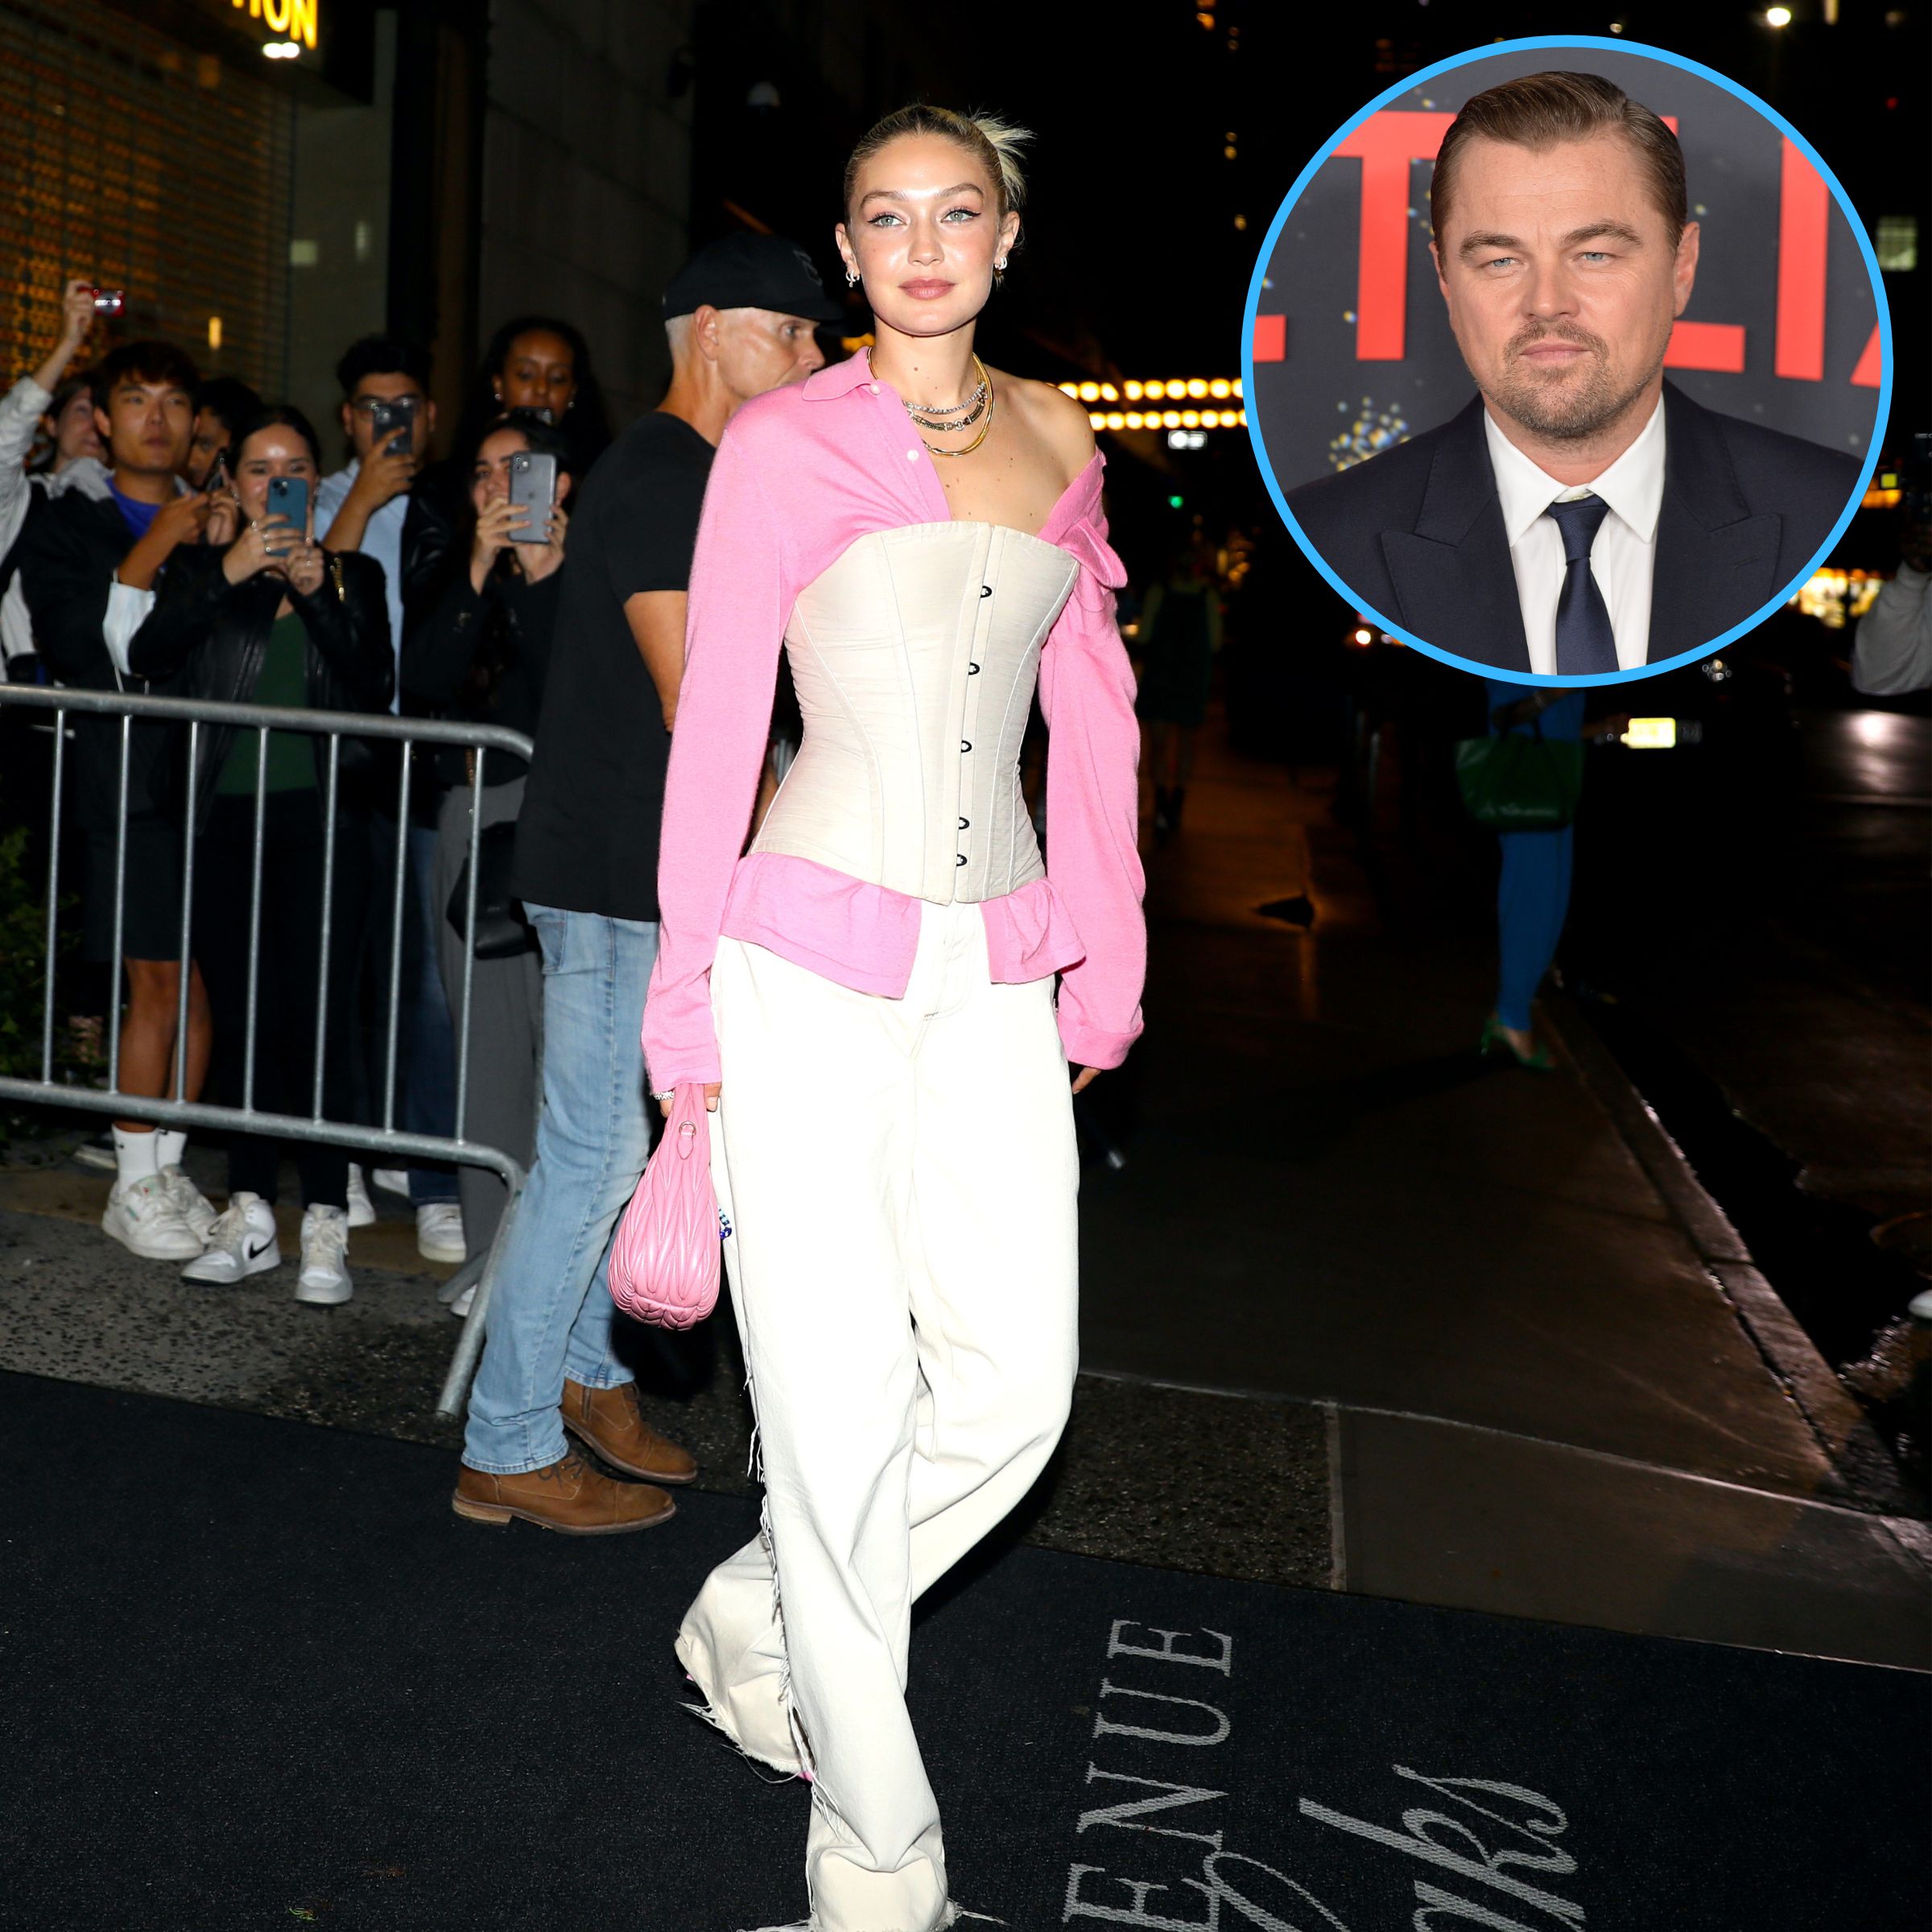 Gigi Hadid Steps Out Solo After Leo DiCaprio Fling: Photos